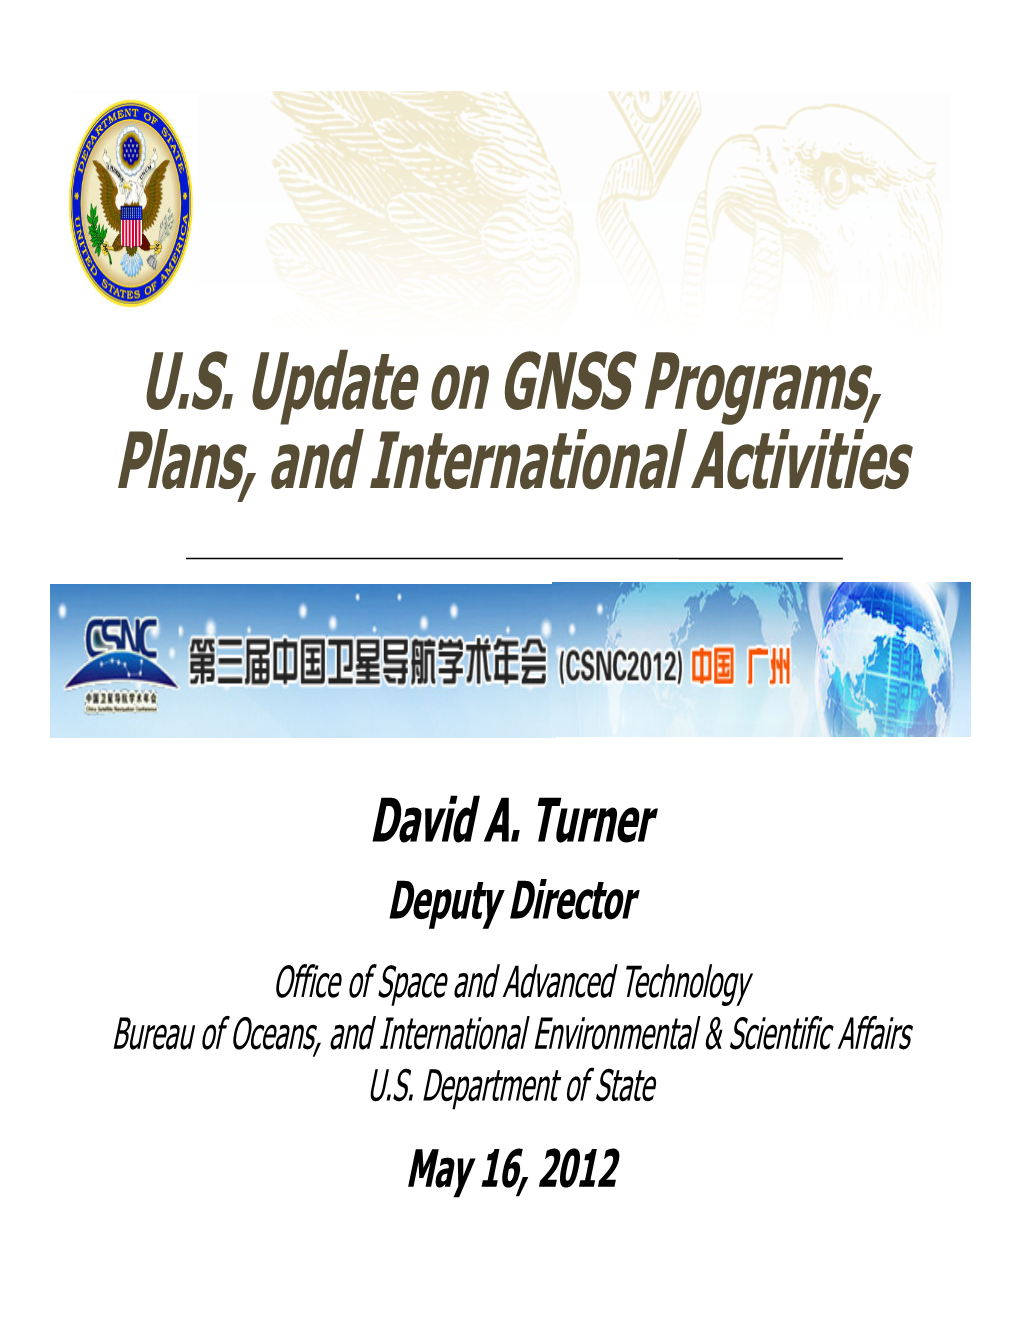 U.S. Update on GNSS Programs, Plans, and International Activities